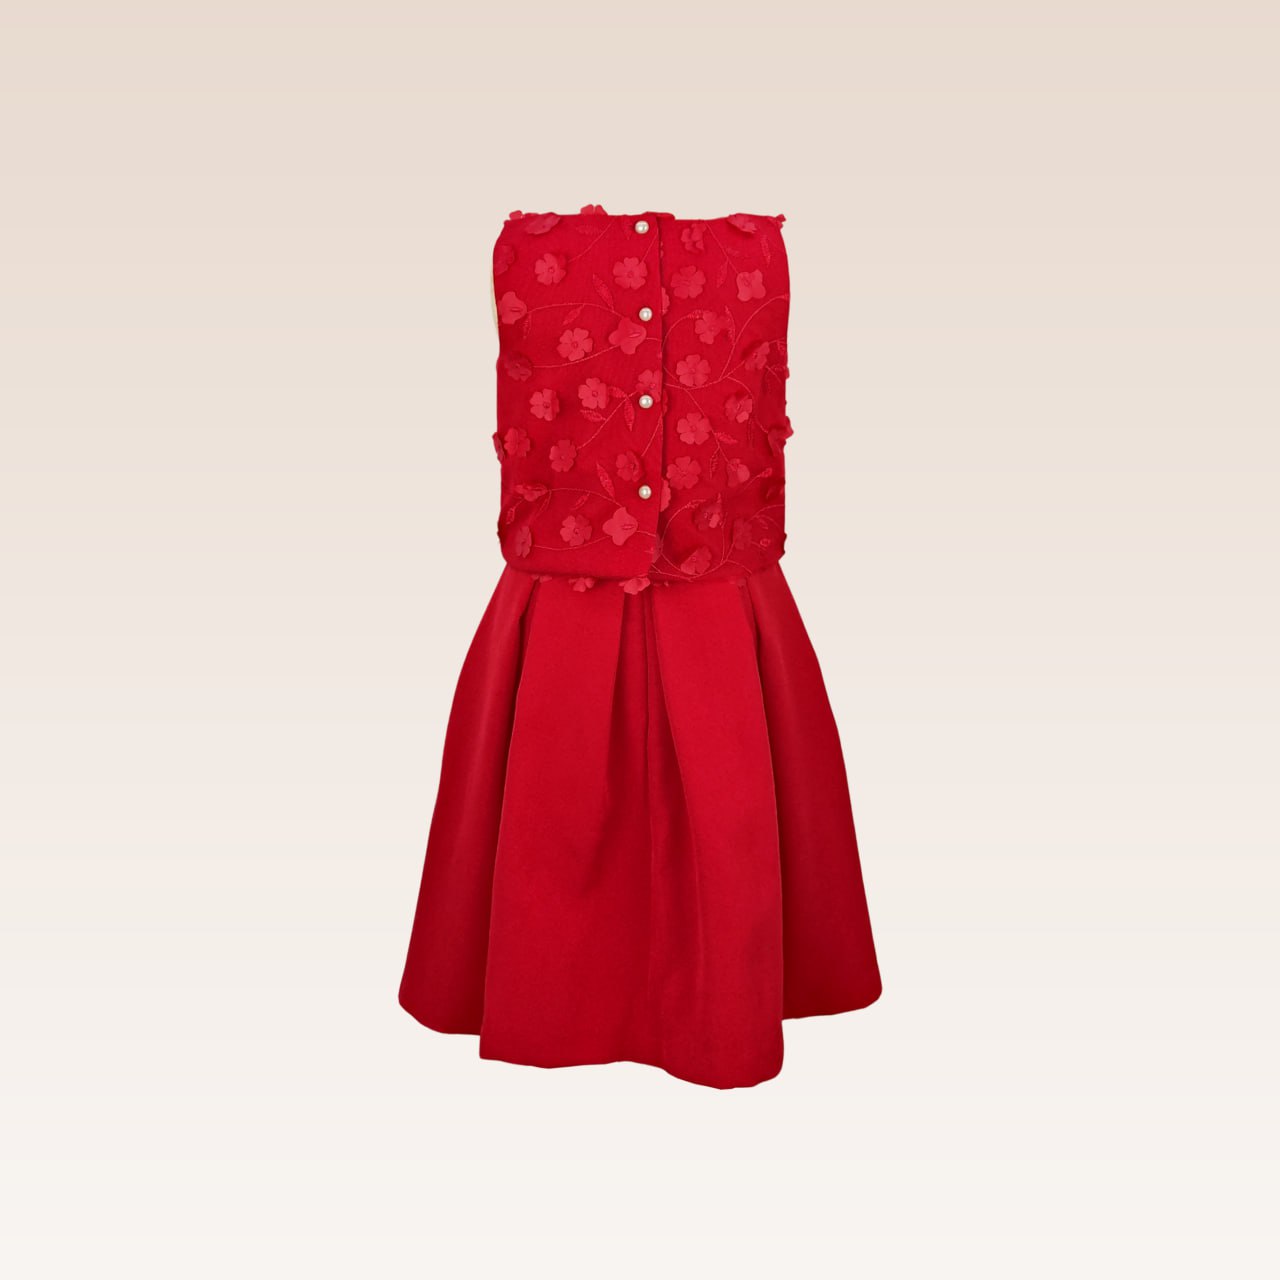 Gwen Girls Red Party Dress Shell Mesh Floral Top and Pleated Skirt